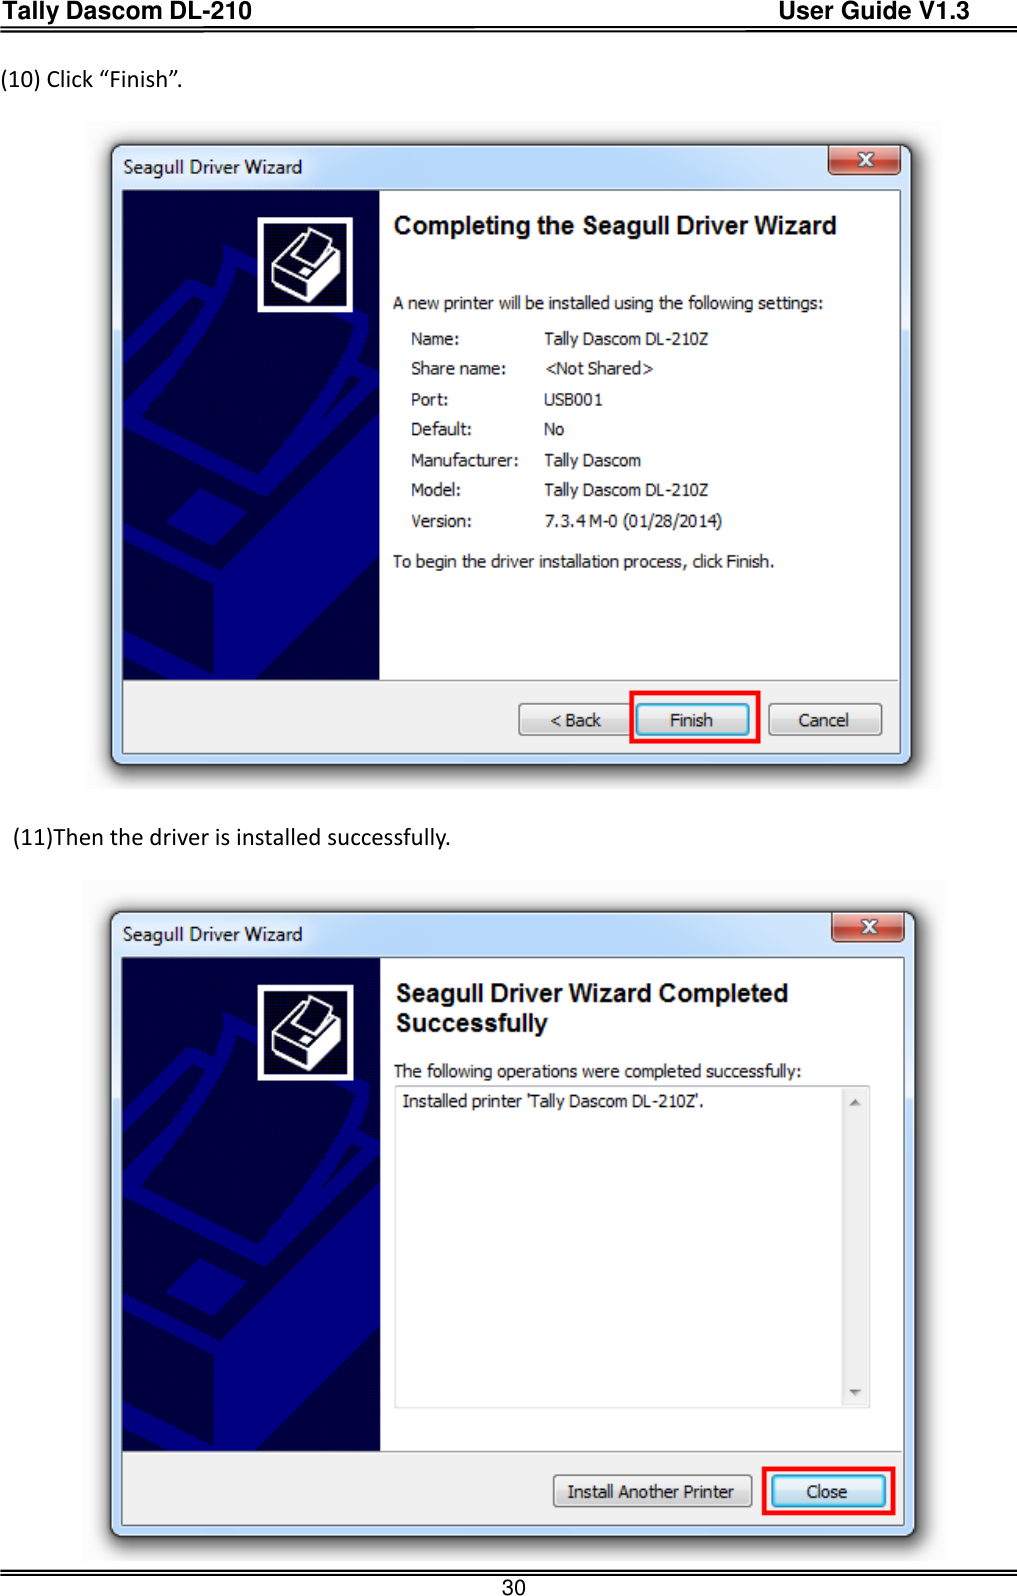 Tally Dascom DL-210                                          User Guide V1.3  30 (10) Click “Finish”.      (11)Then the driver is installed successfully.   